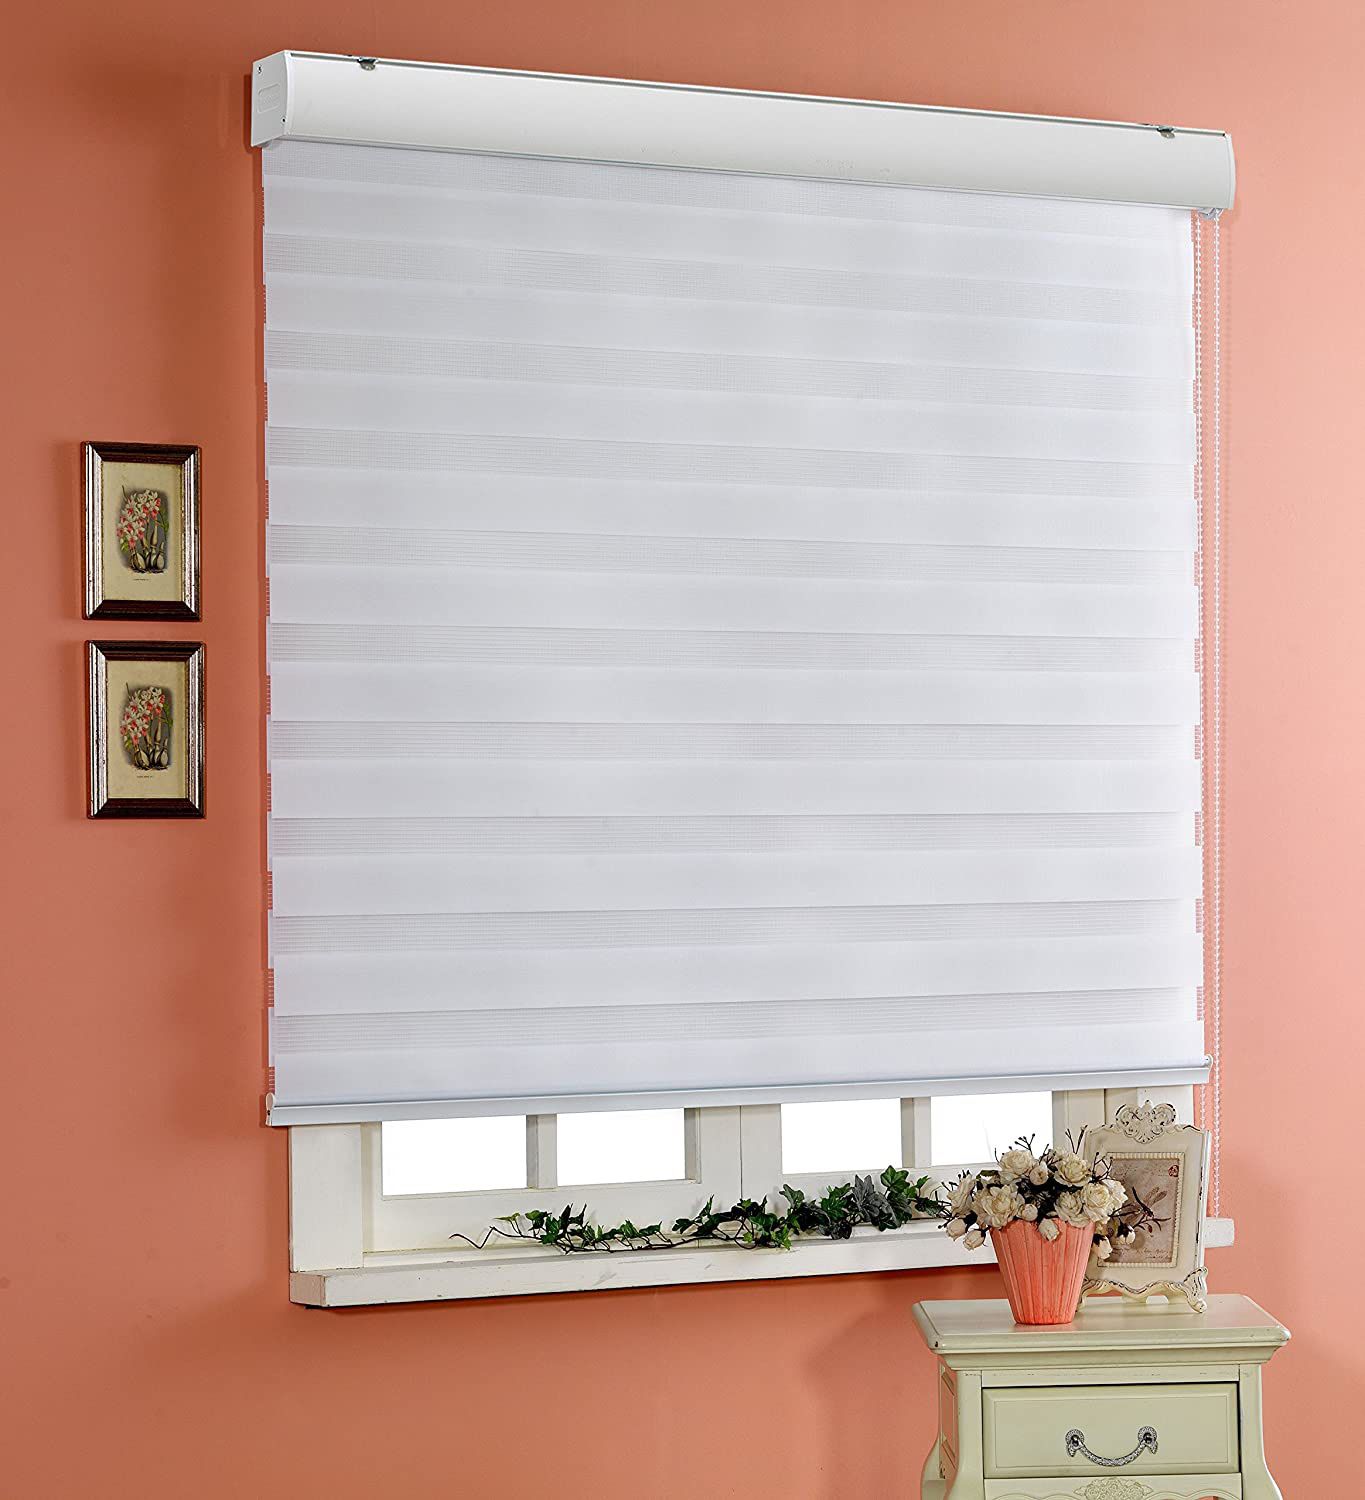 NEW Zebra Roller Blinds, Dual Layer Shades, 79.50"W x 46"H, Day/Night Window Drapes